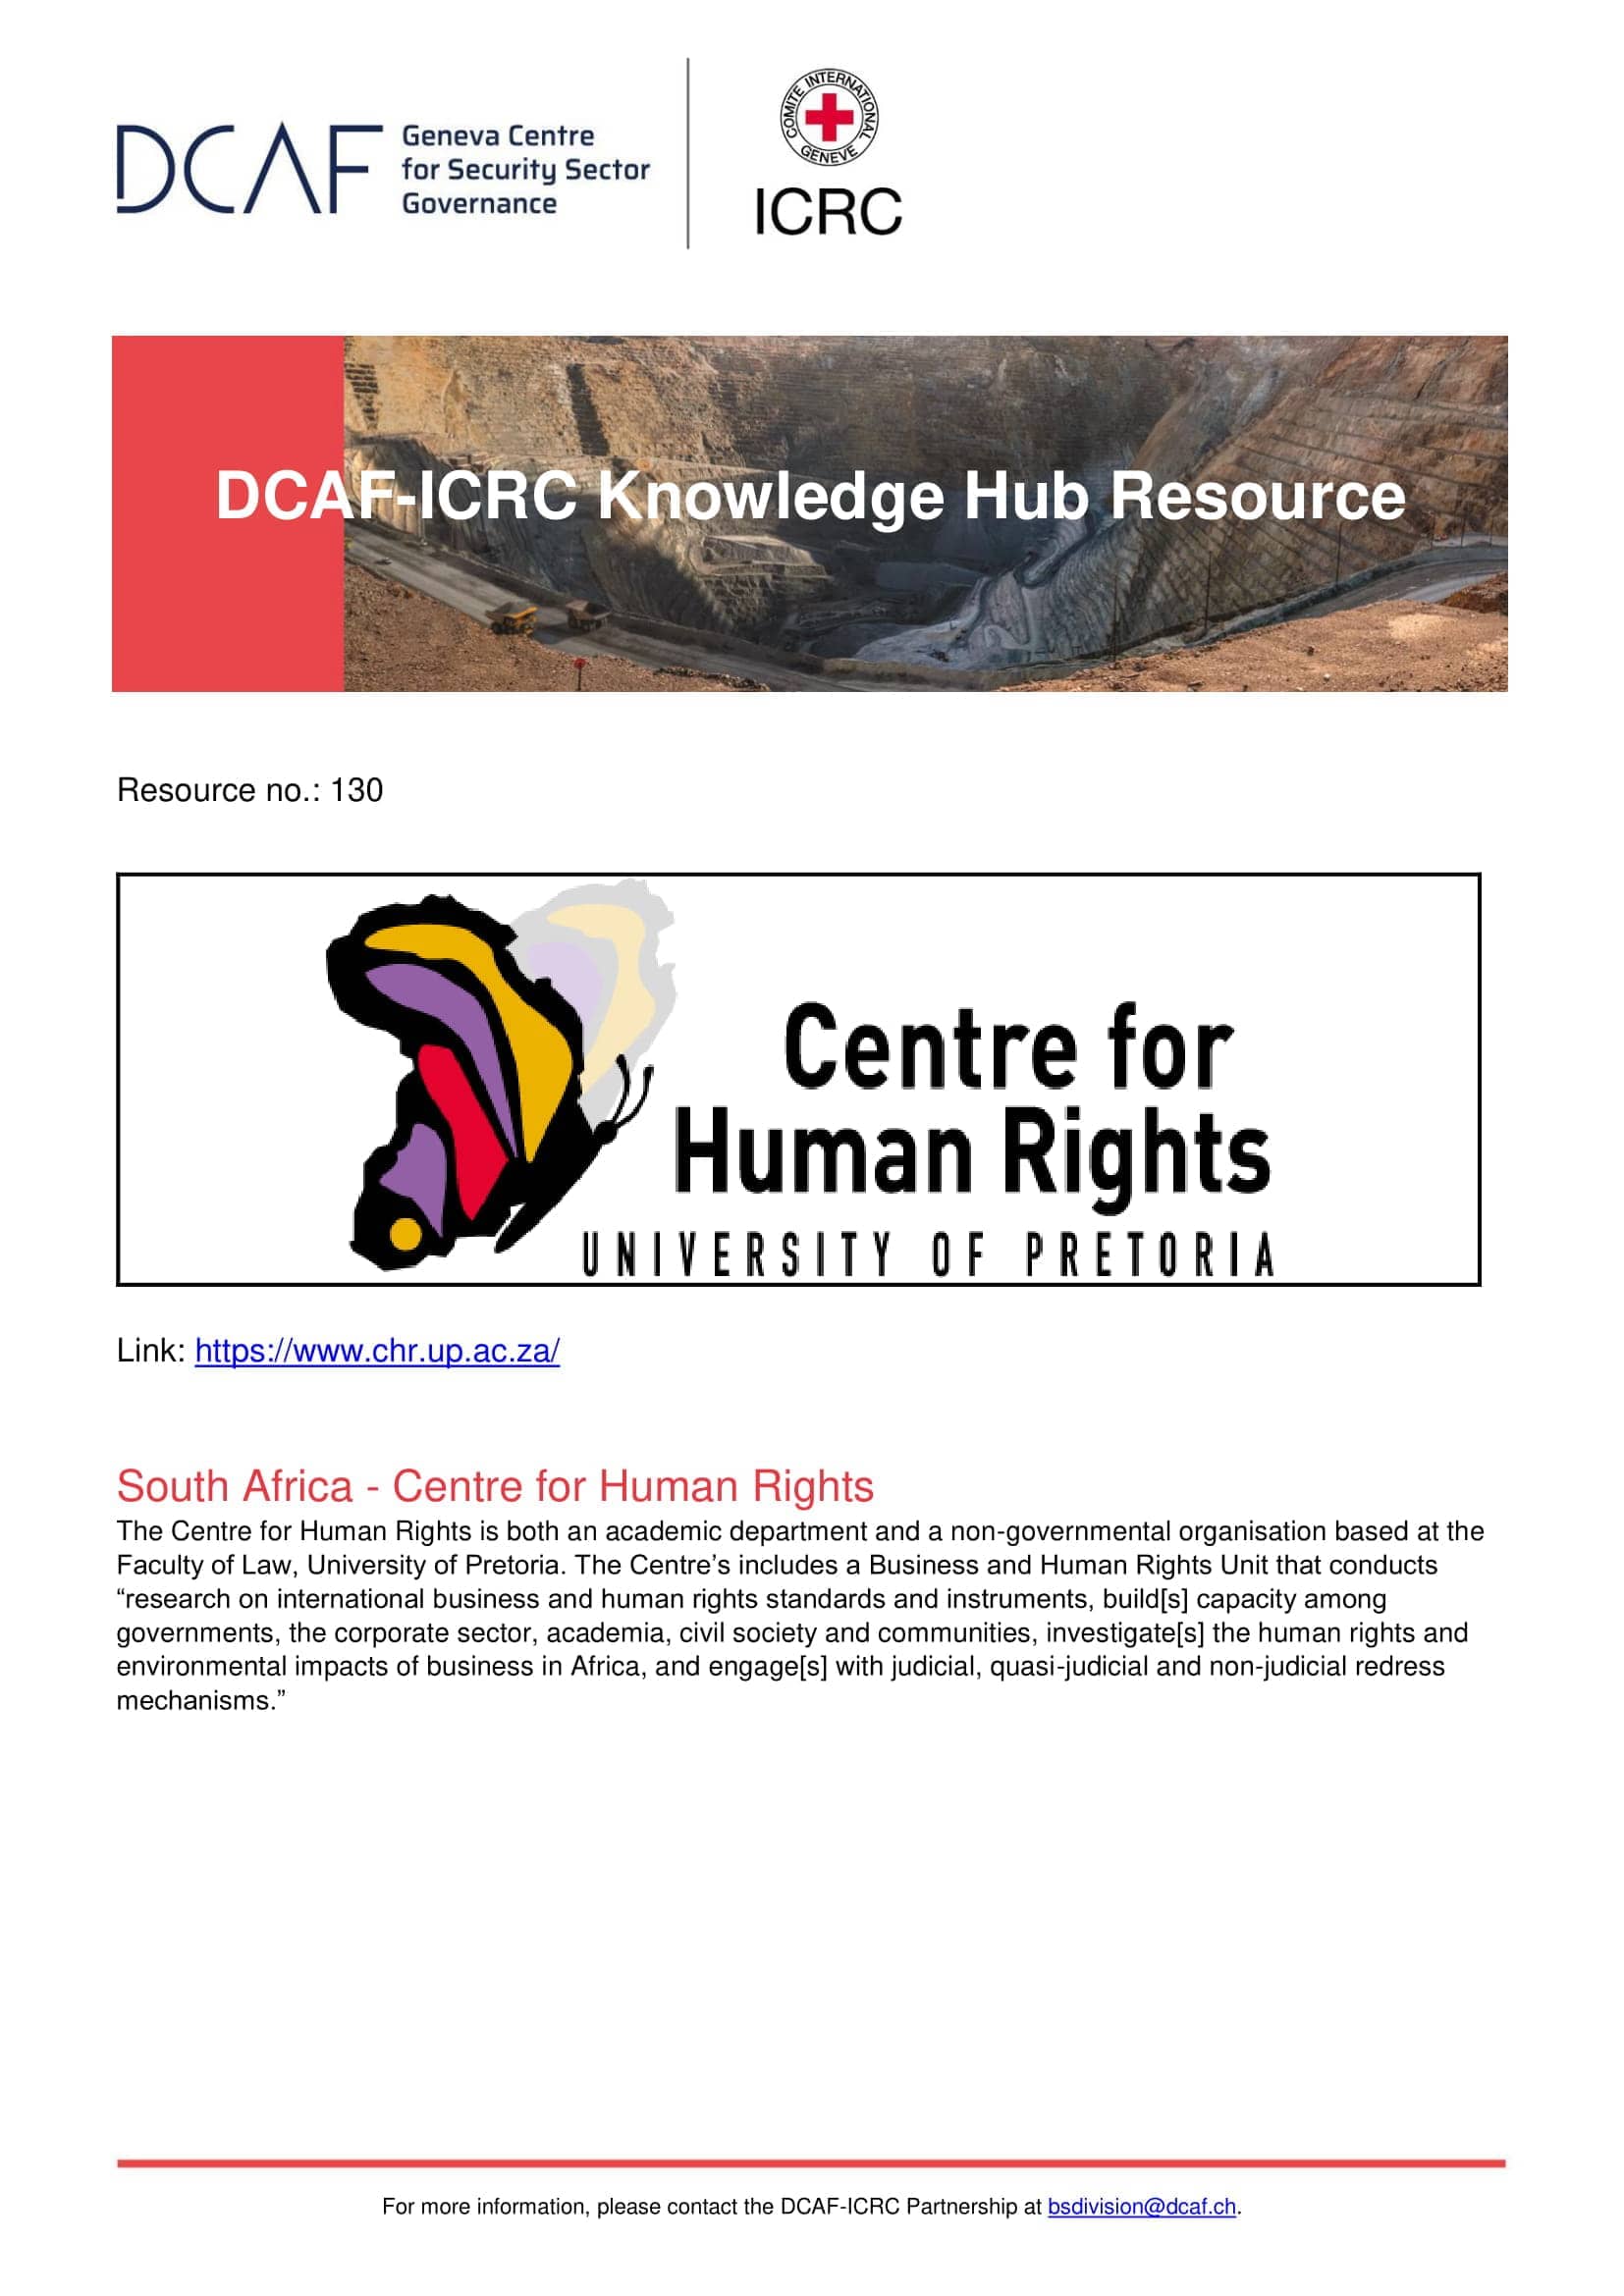 South Africa - Centre for Human Rights